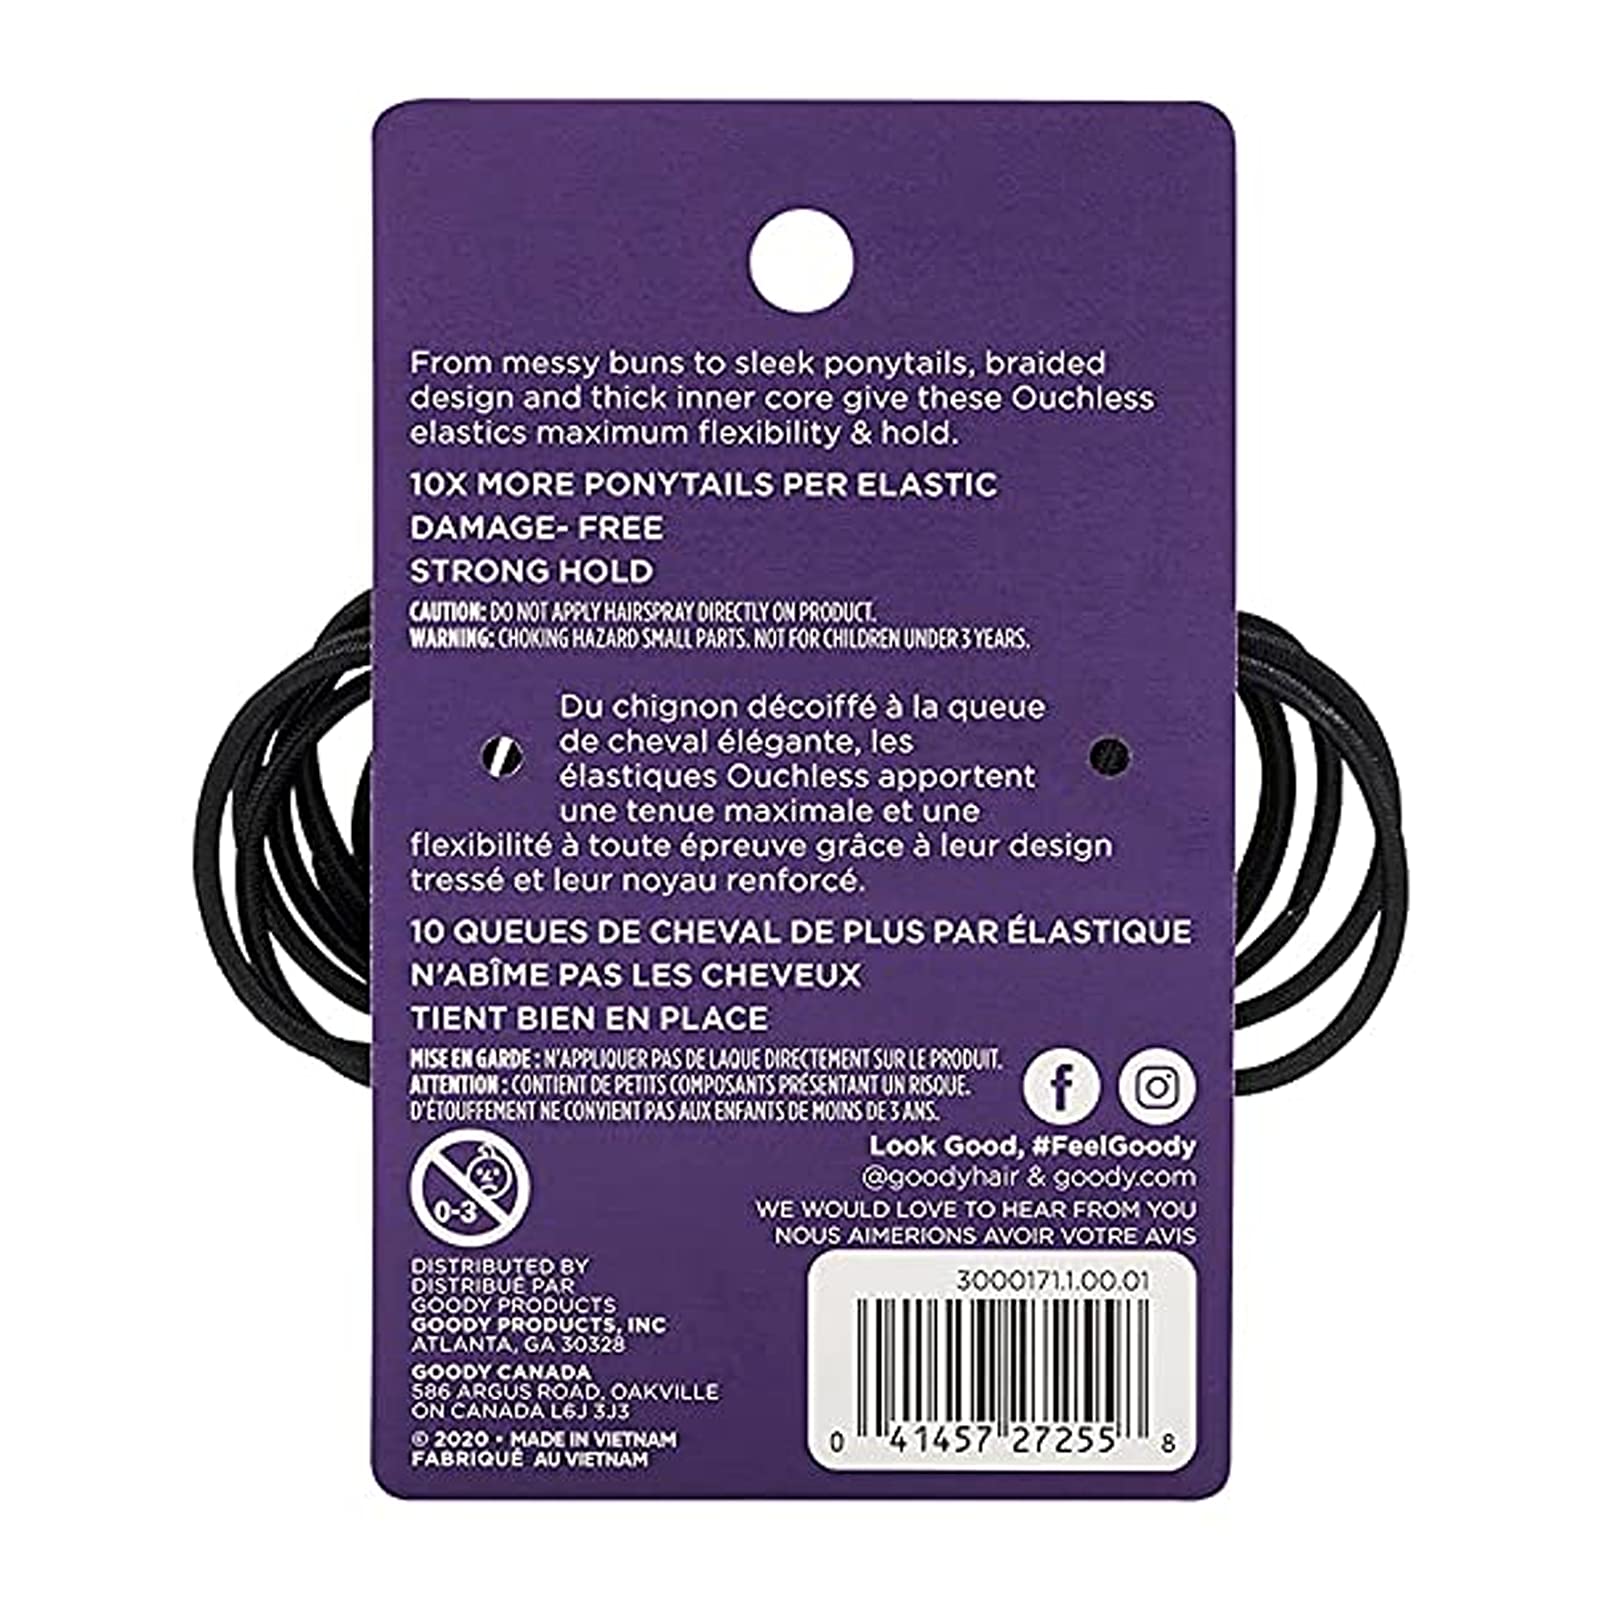 Goody Ouchless Hair Elastics, Black, 36 Count (Pack of 1)